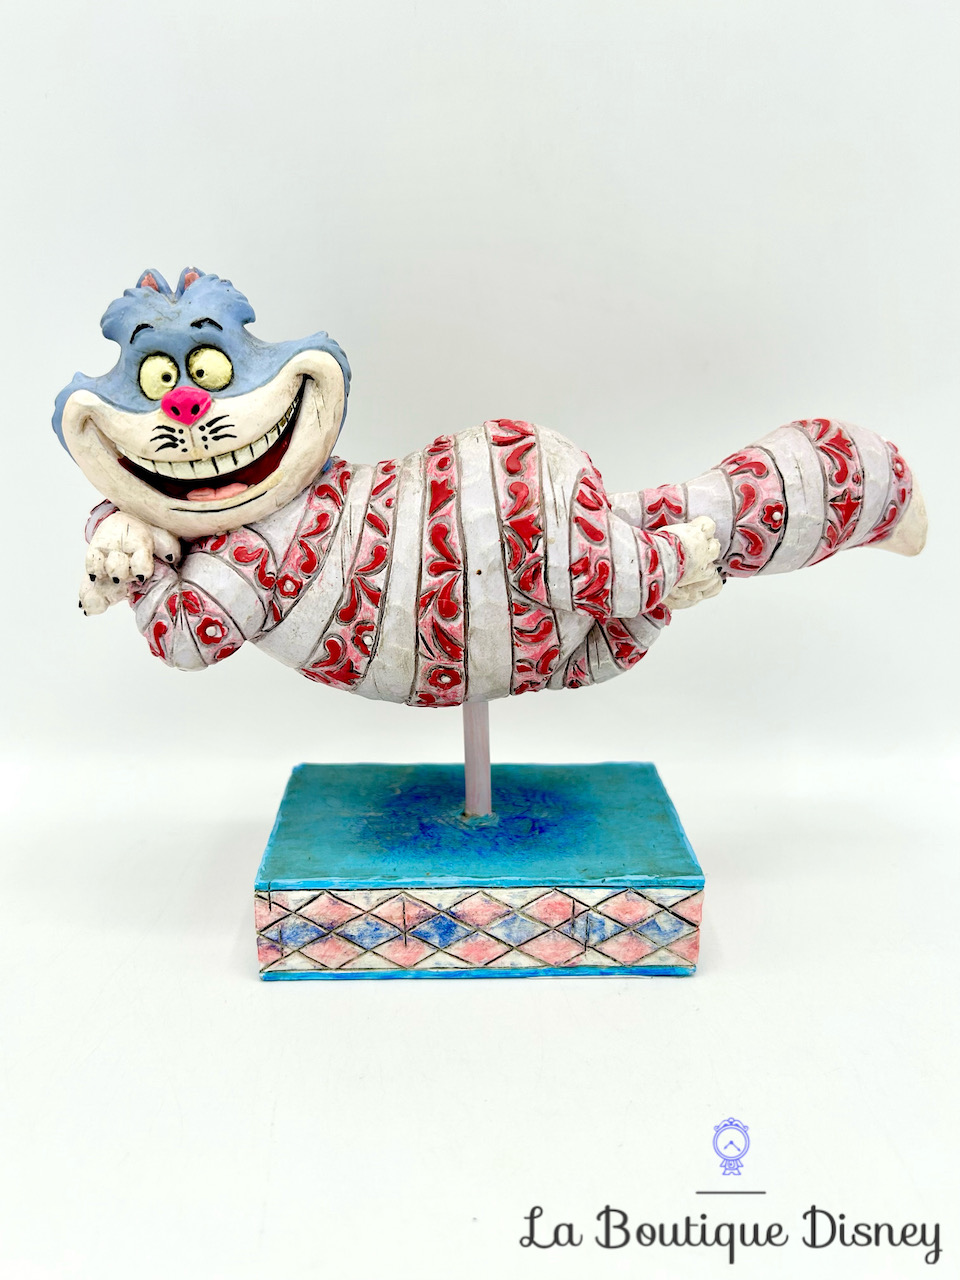 Figurine Jim Shore Chat Cheshire Alice aux pays des merveilles Disney Traditions Showcase Collection 4007211 Grinning Cheshire